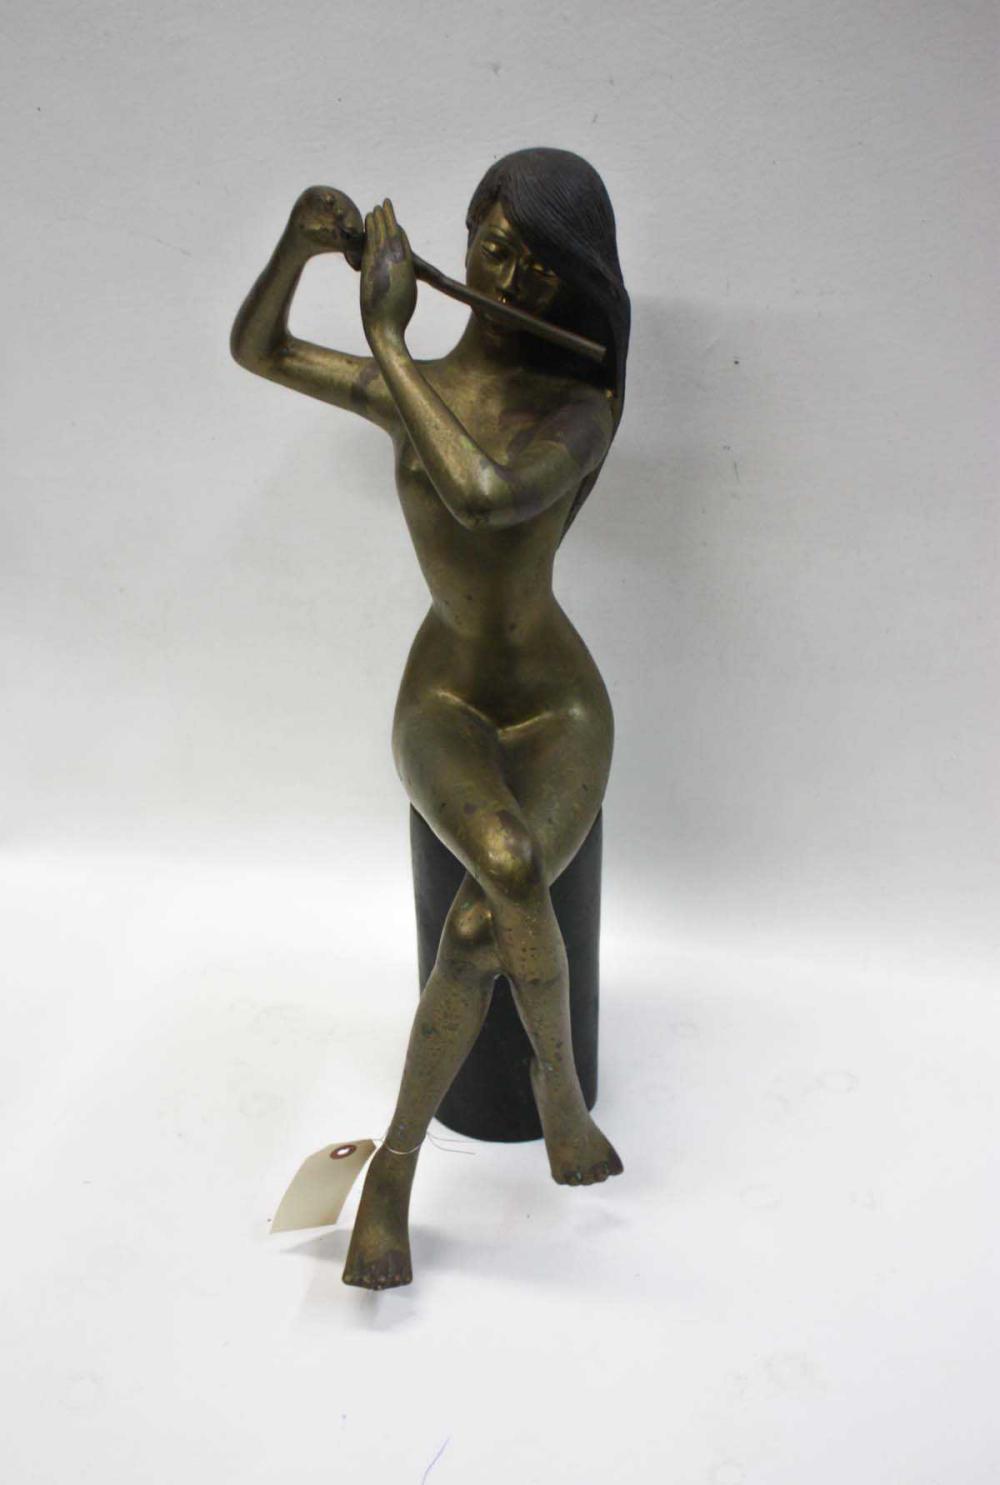 CAST BRONZE OF A SEATED NUDE FEMALE,